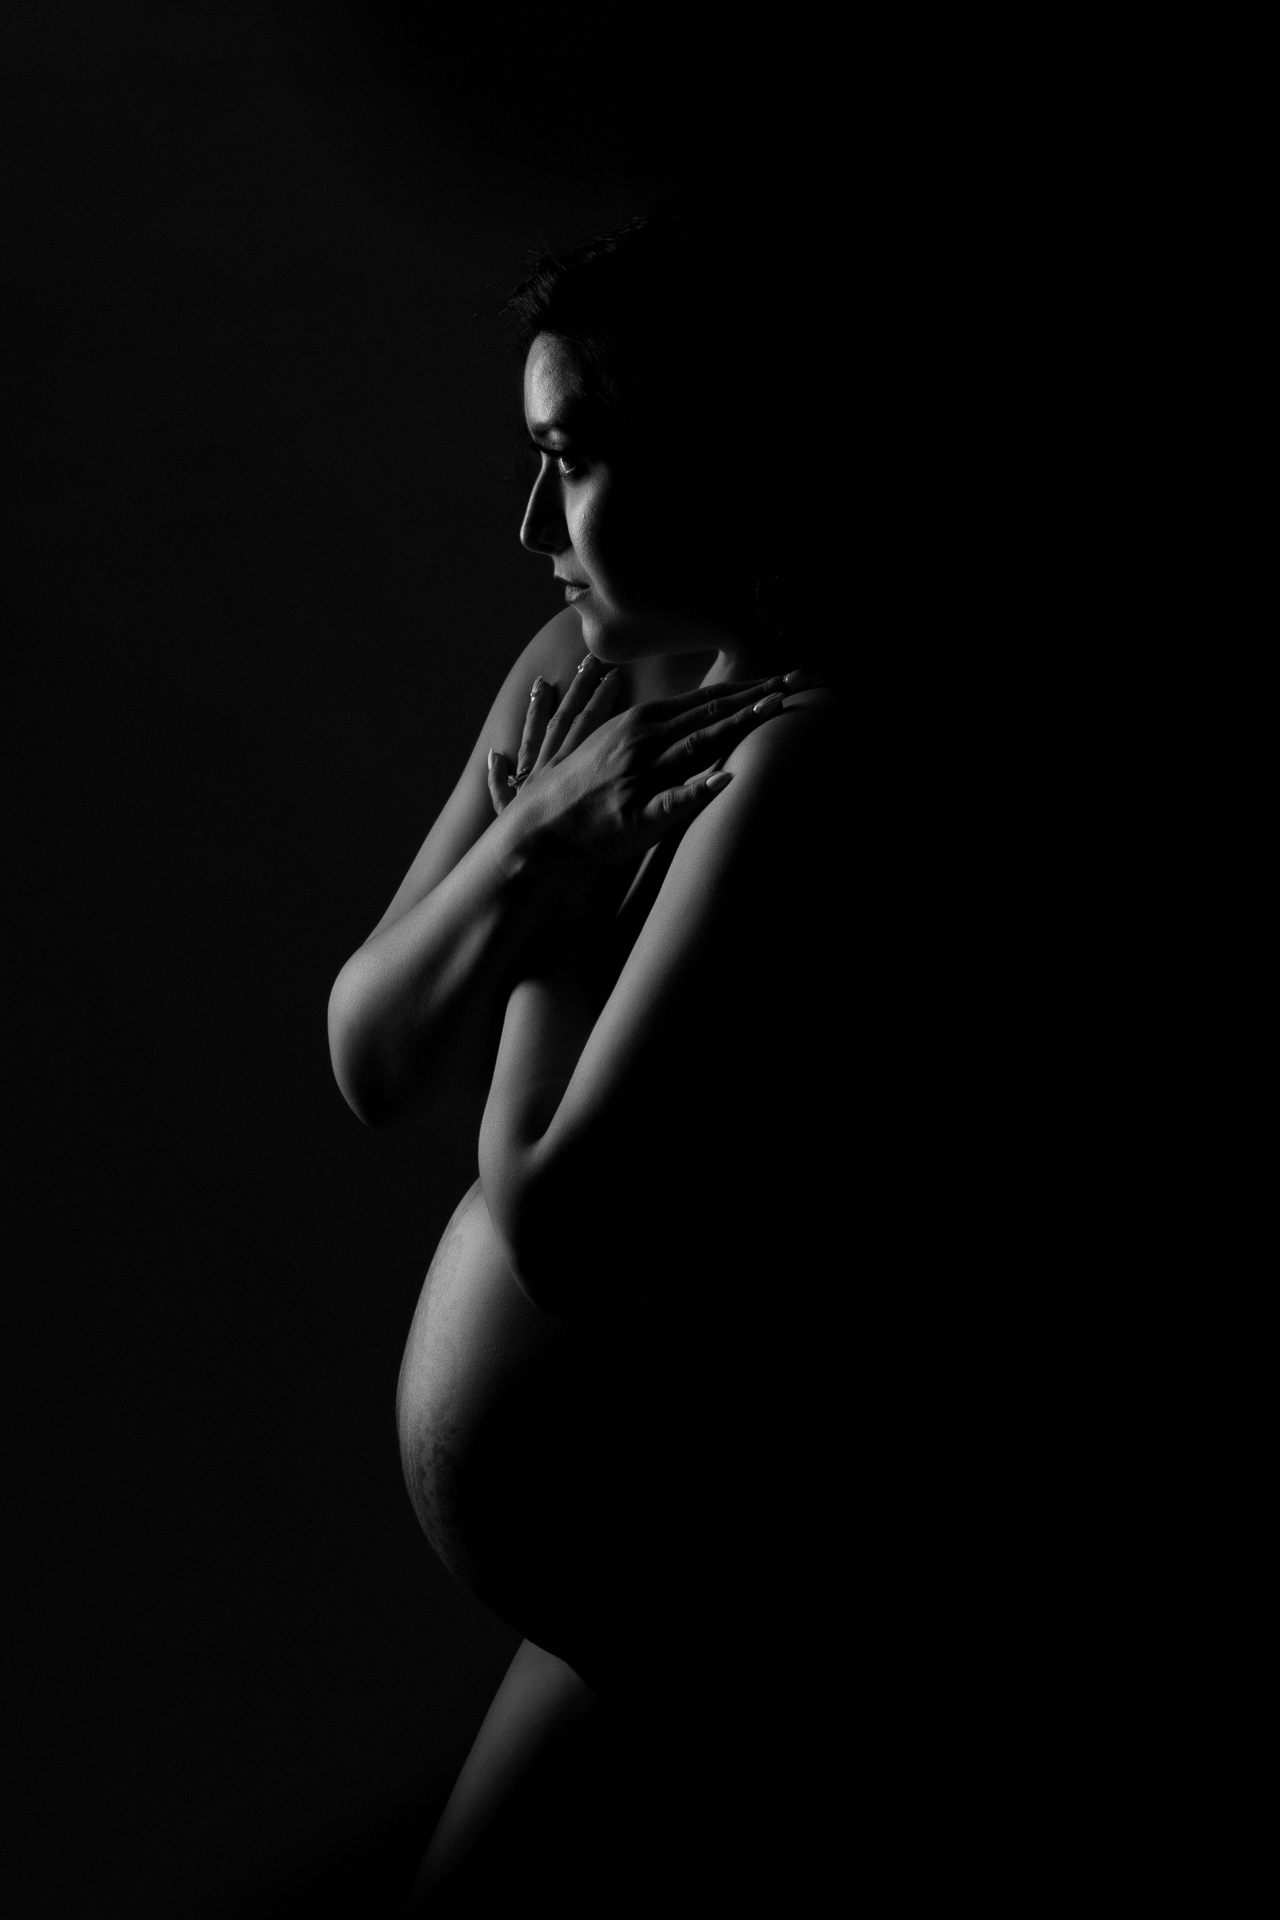 Pregnant woman on white and black image. Lights allows to see belly shape, arms and face.